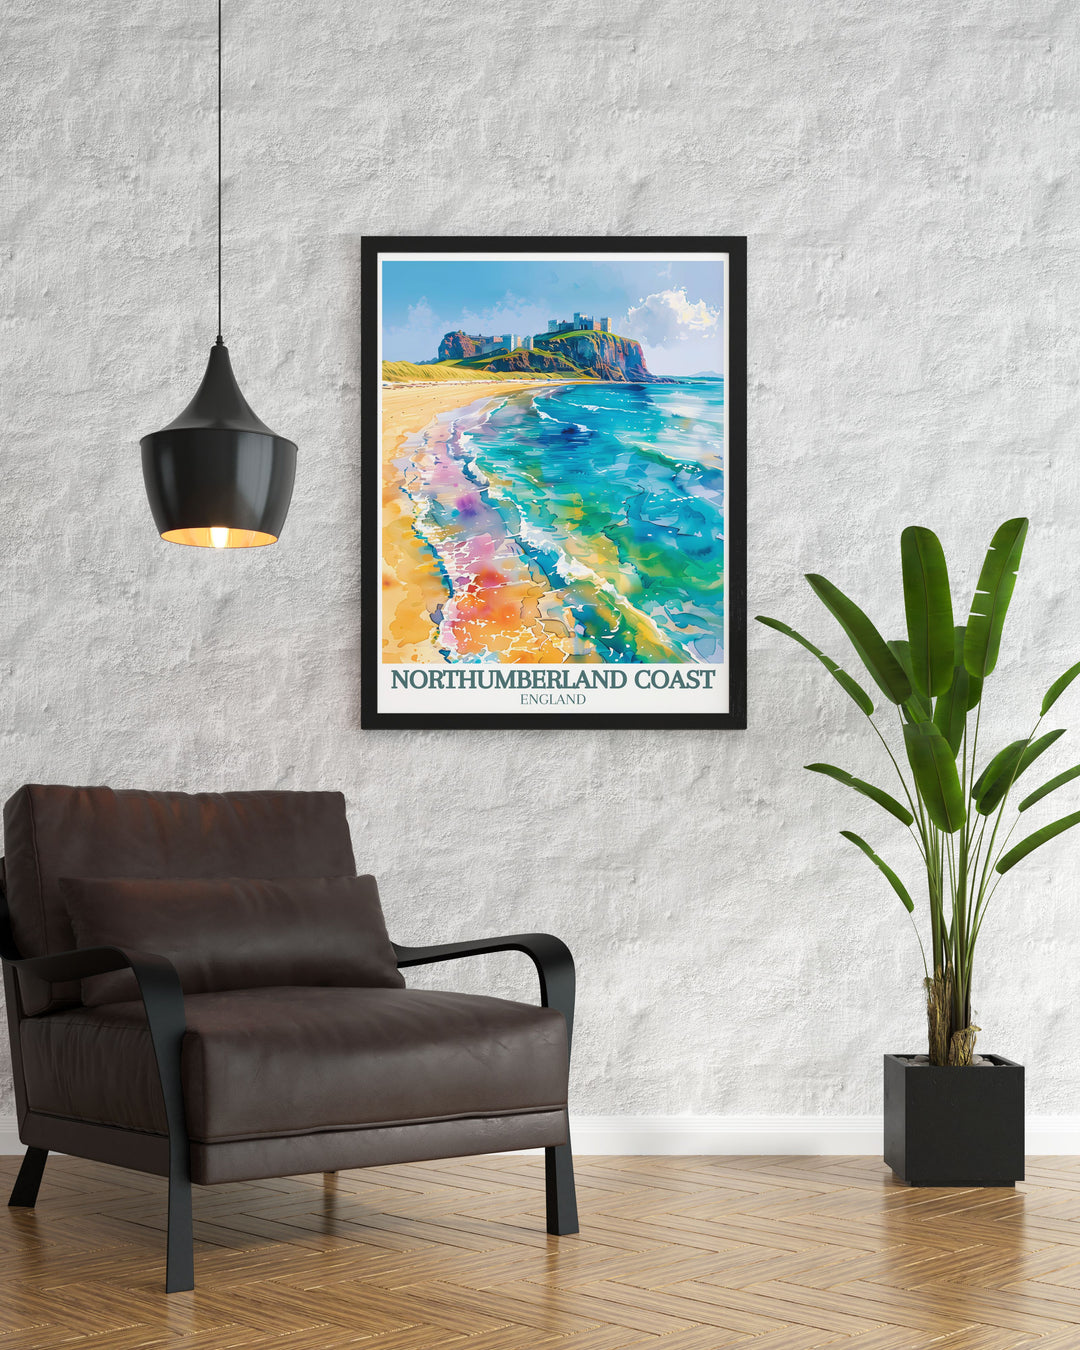 Bucket List Print featuring the stunning Bamburgh Castle and Dunstanburgh Castle on the Northumberland Coast ideal for travel enthusiasts and history buffs who want to bring a piece of Northumberland into their home